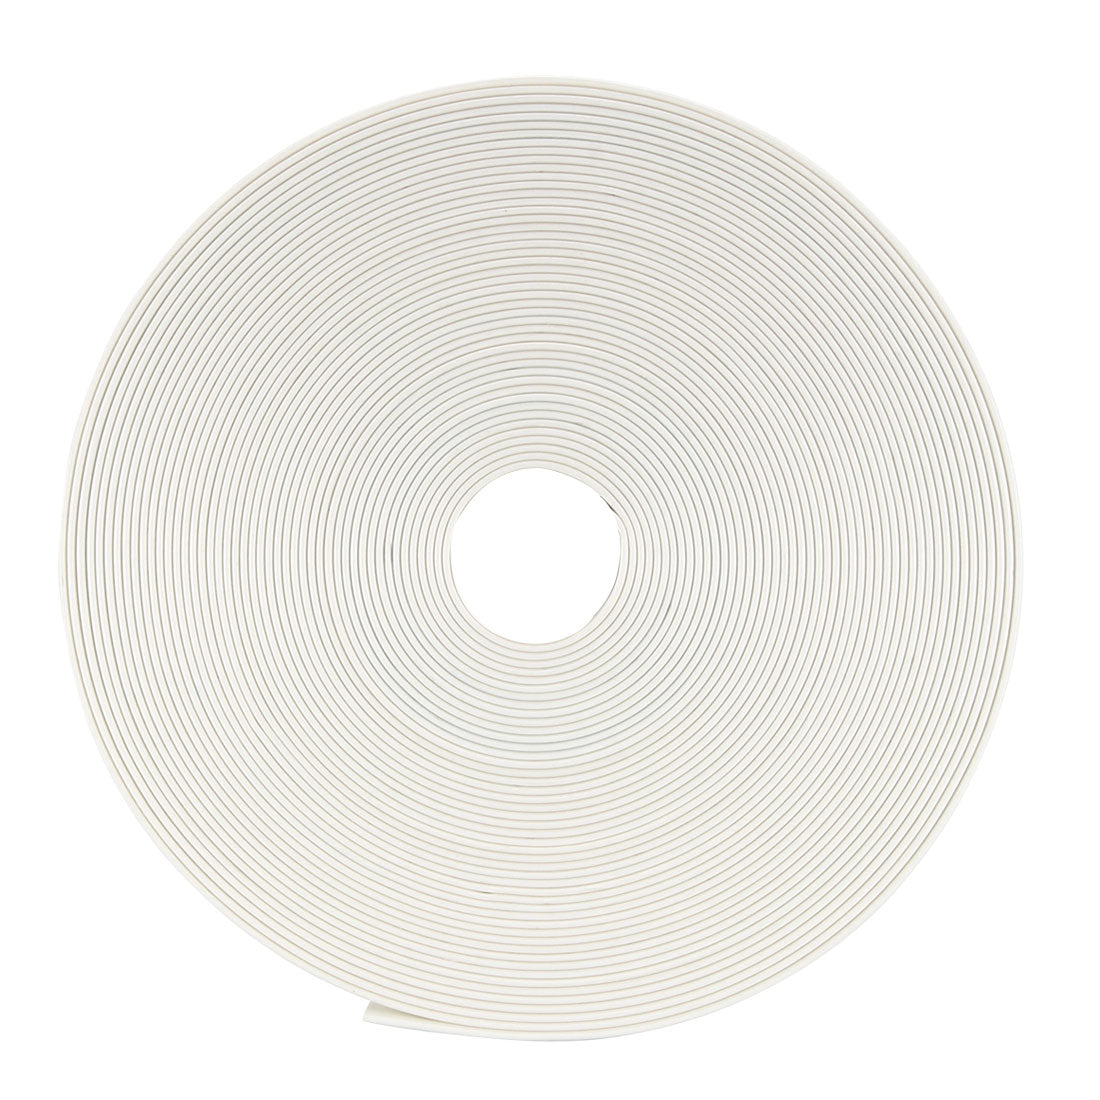 uxcell Uxcell Heat Shrink Tube 2:1 Electrical Insulation Tube Wire Cable Tubing Sleeving Wrap White 12mm Diameter 10m Long